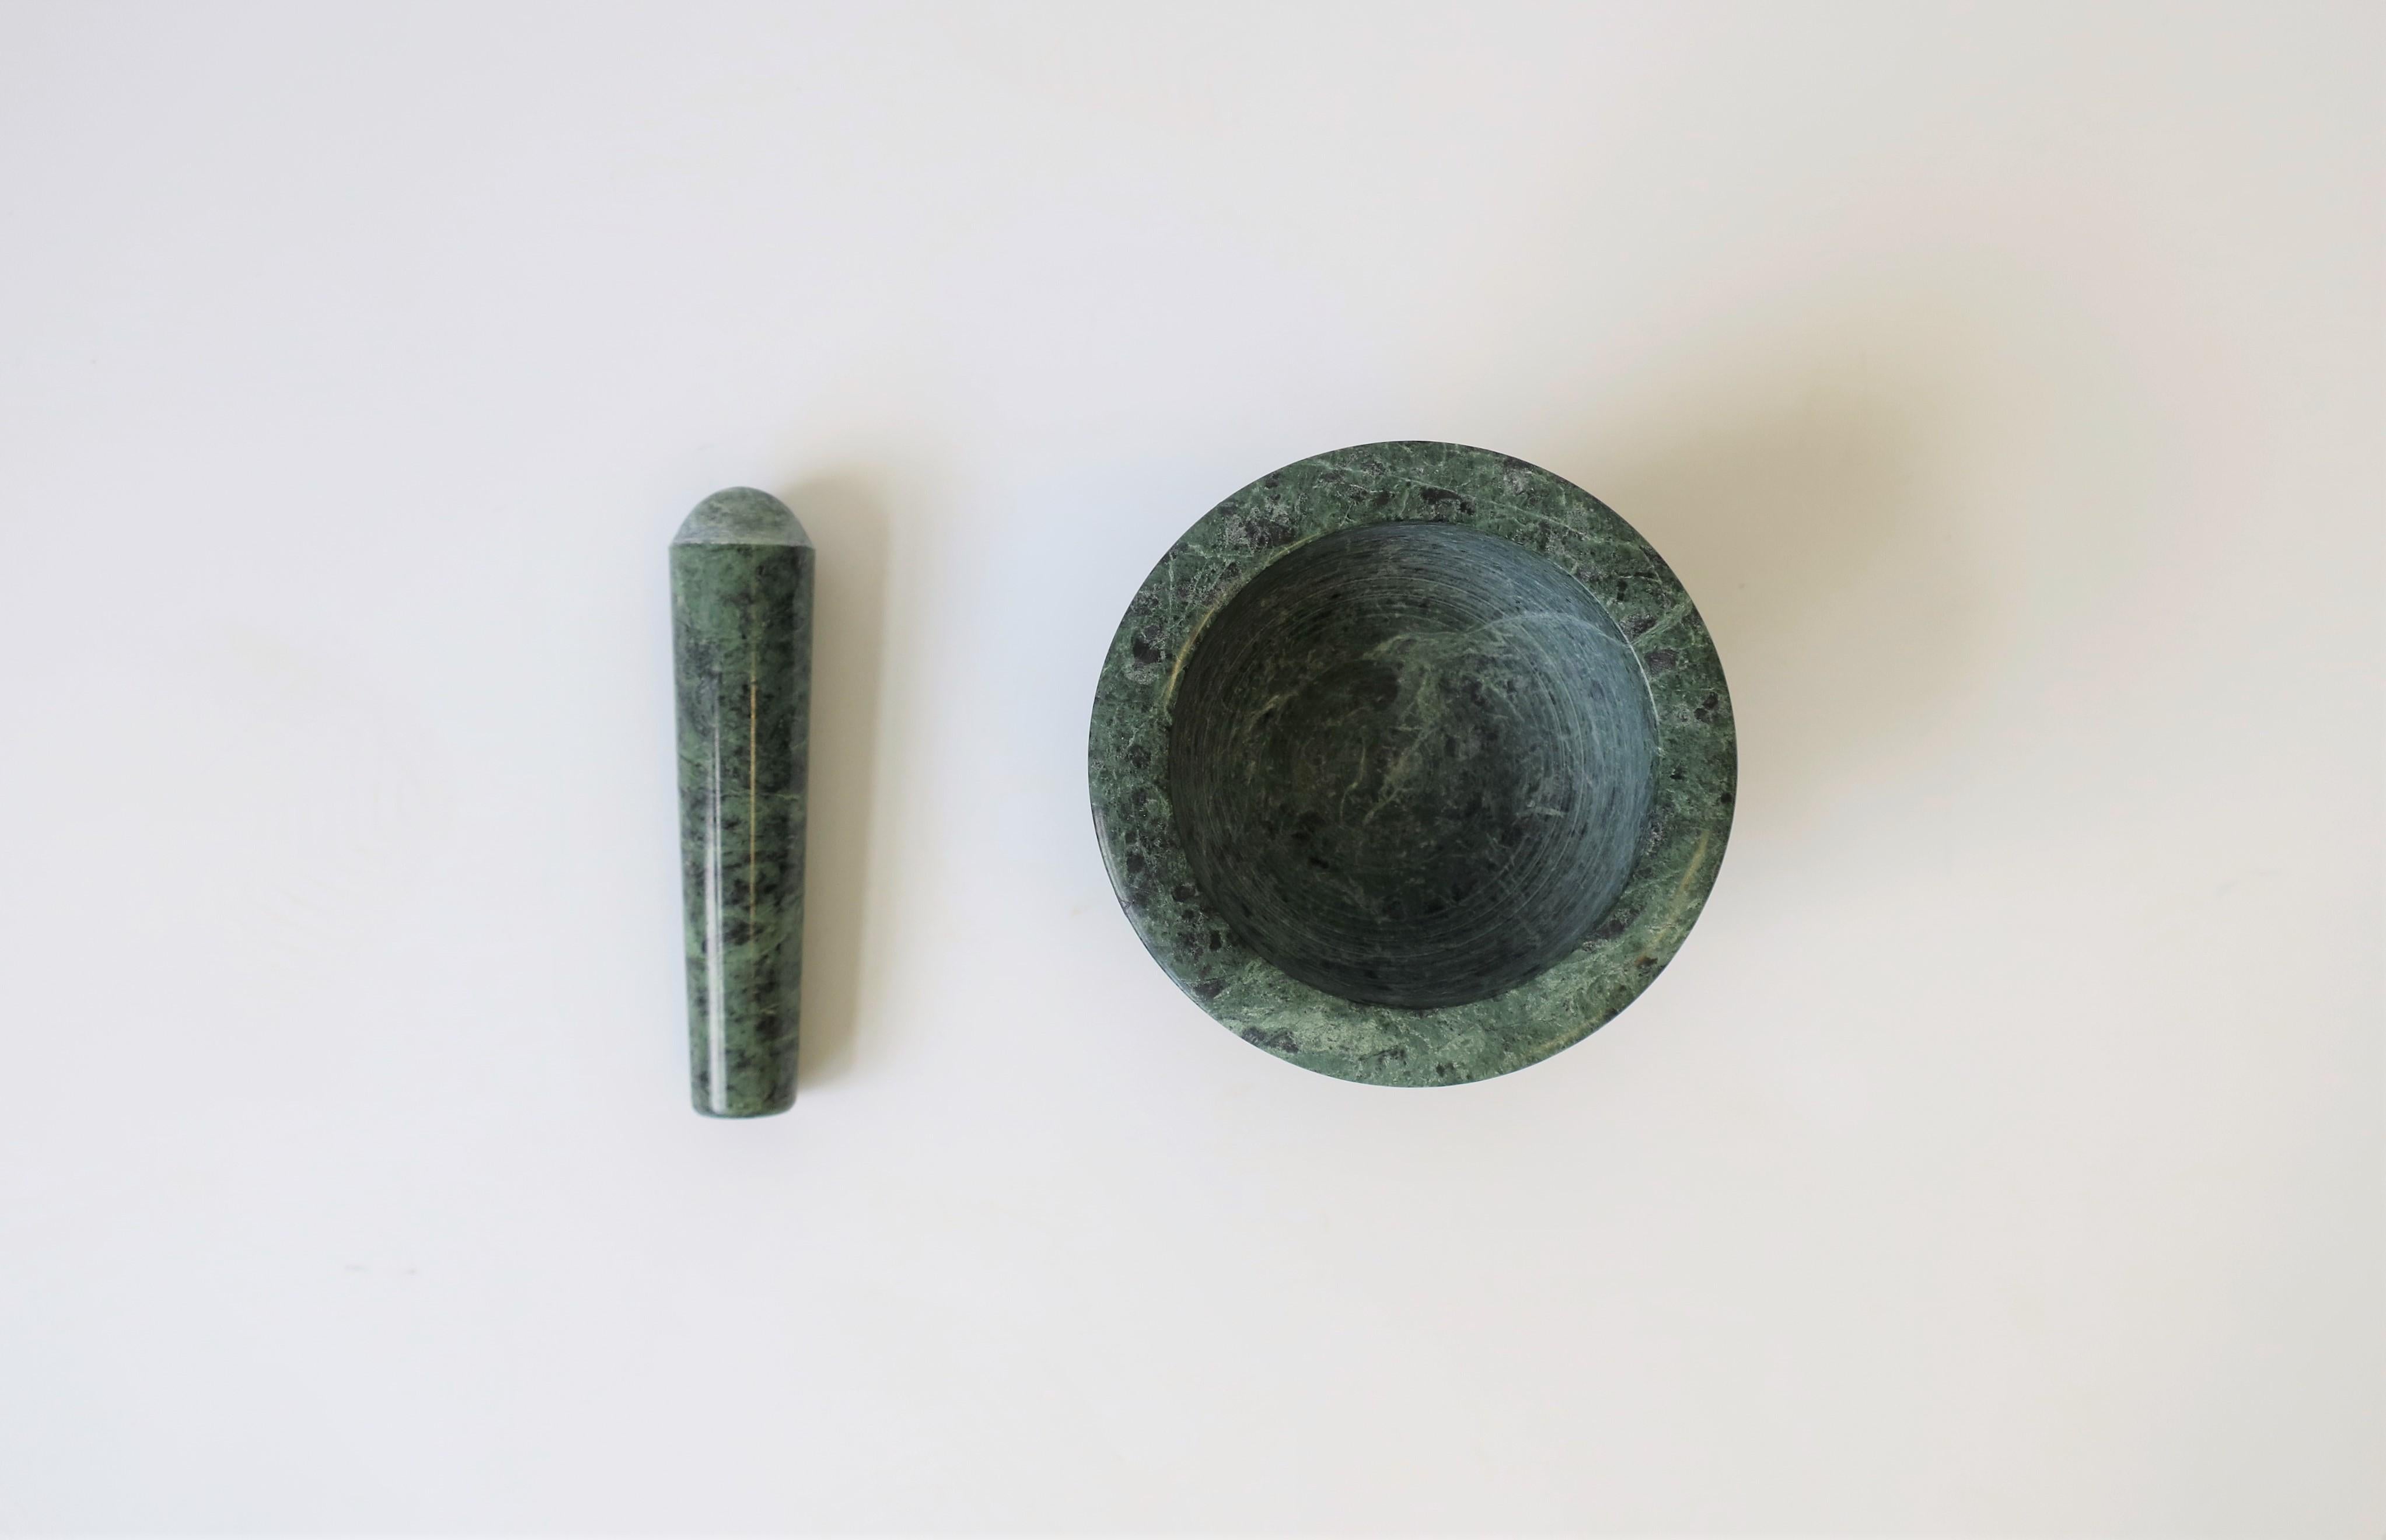 Polished Mortar and Pestle in Dark Green and Black Marble